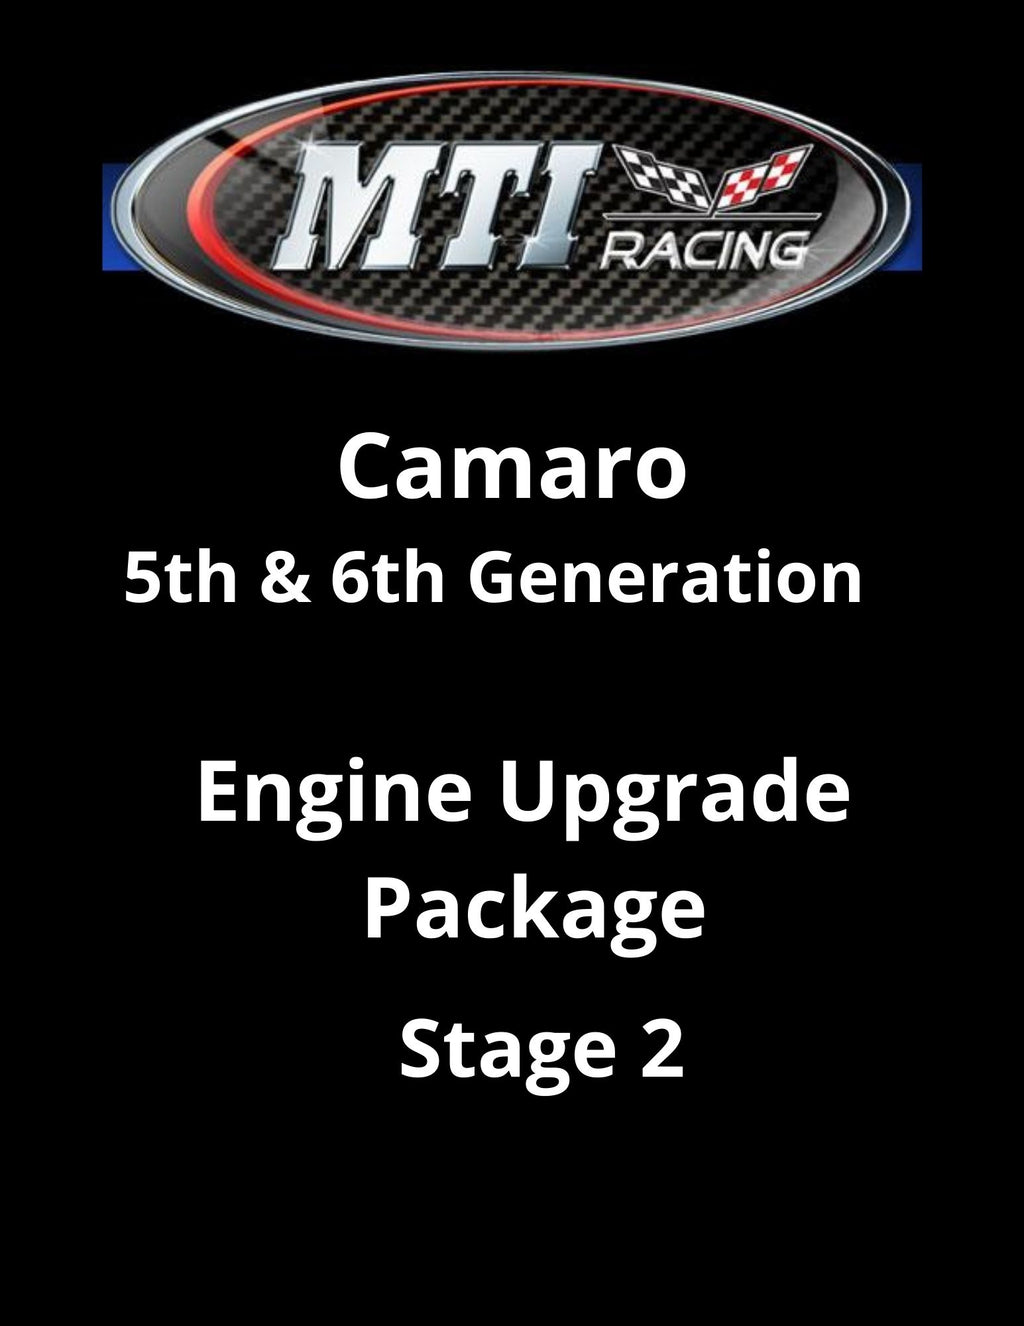 MTI Racing Camaro 5th & 6th Generation Engine Upgrade Package Stage 2